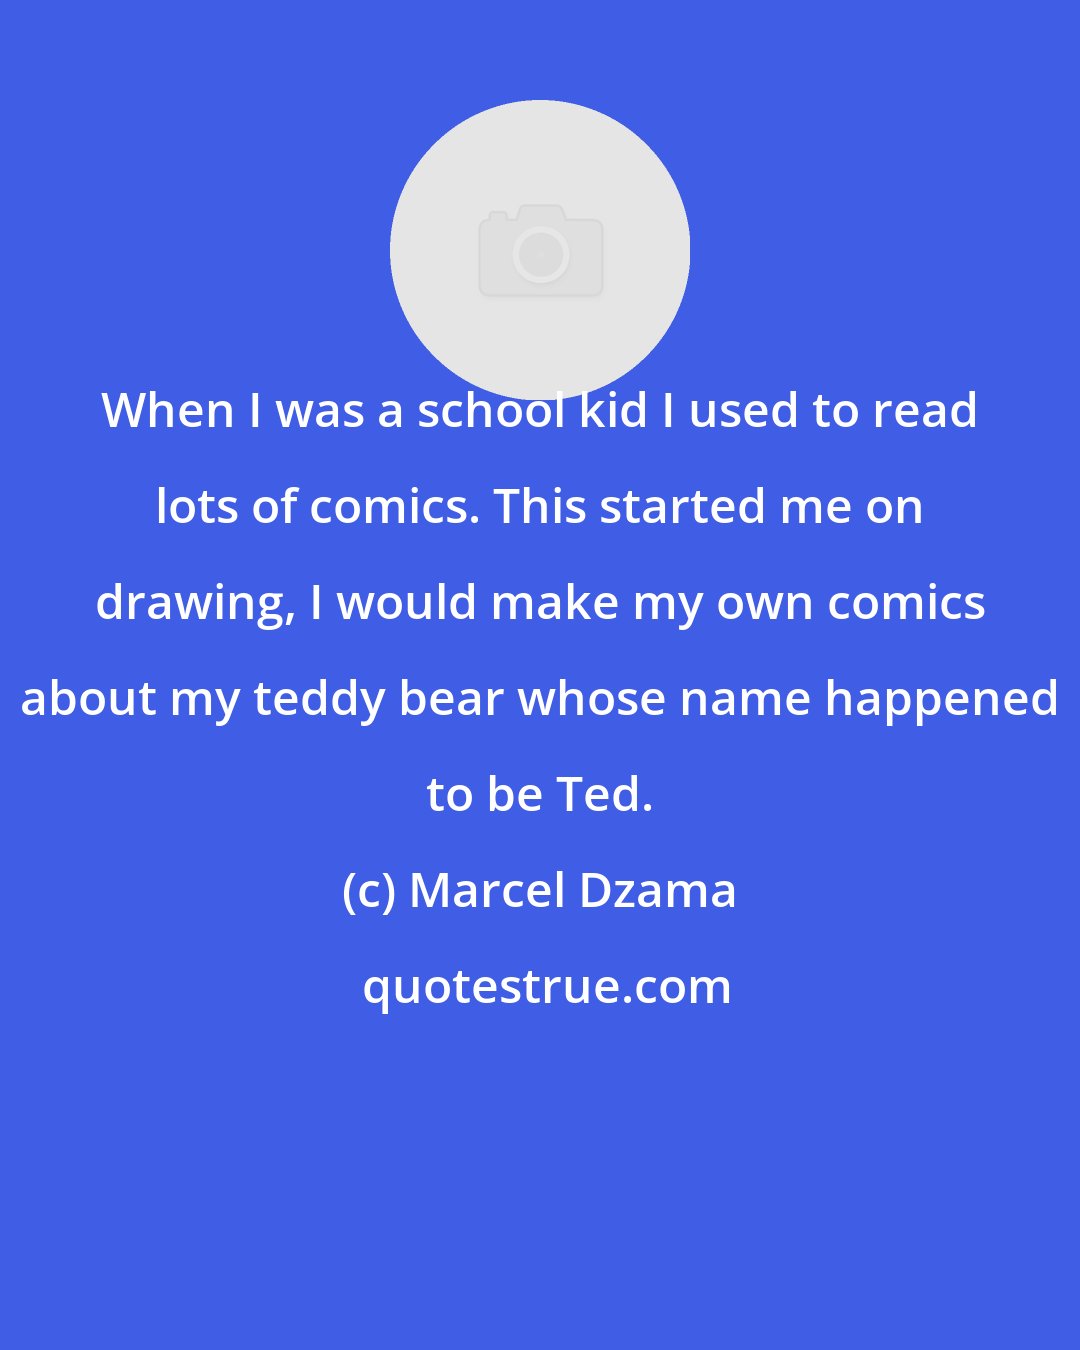 Marcel Dzama: When I was a school kid I used to read lots of comics. This started me on drawing, I would make my own comics about my teddy bear whose name happened to be Ted.